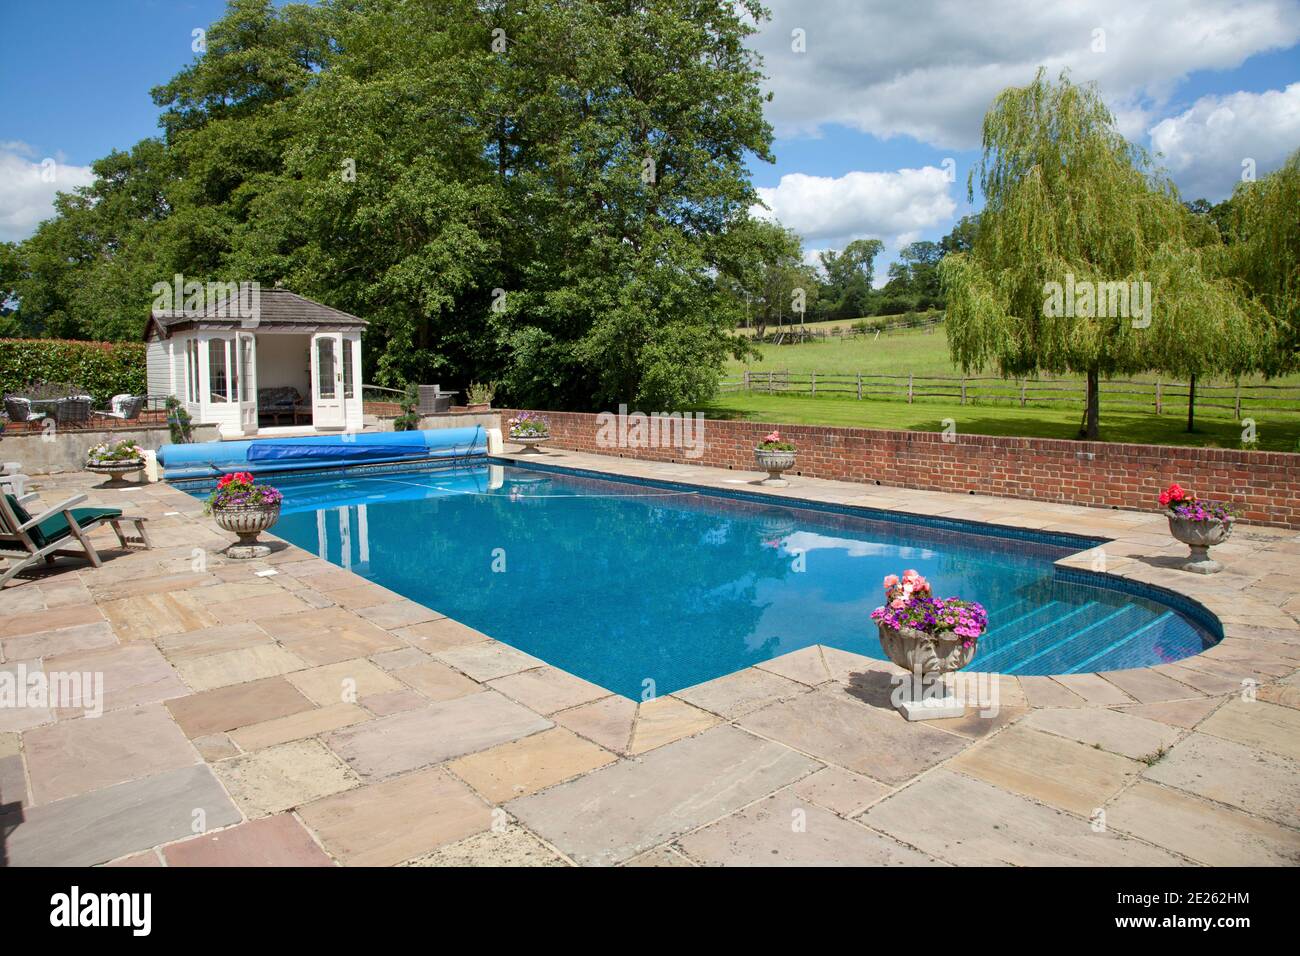 Outdoor private rectangular swimming pool with steps and pool hut Stock Photo